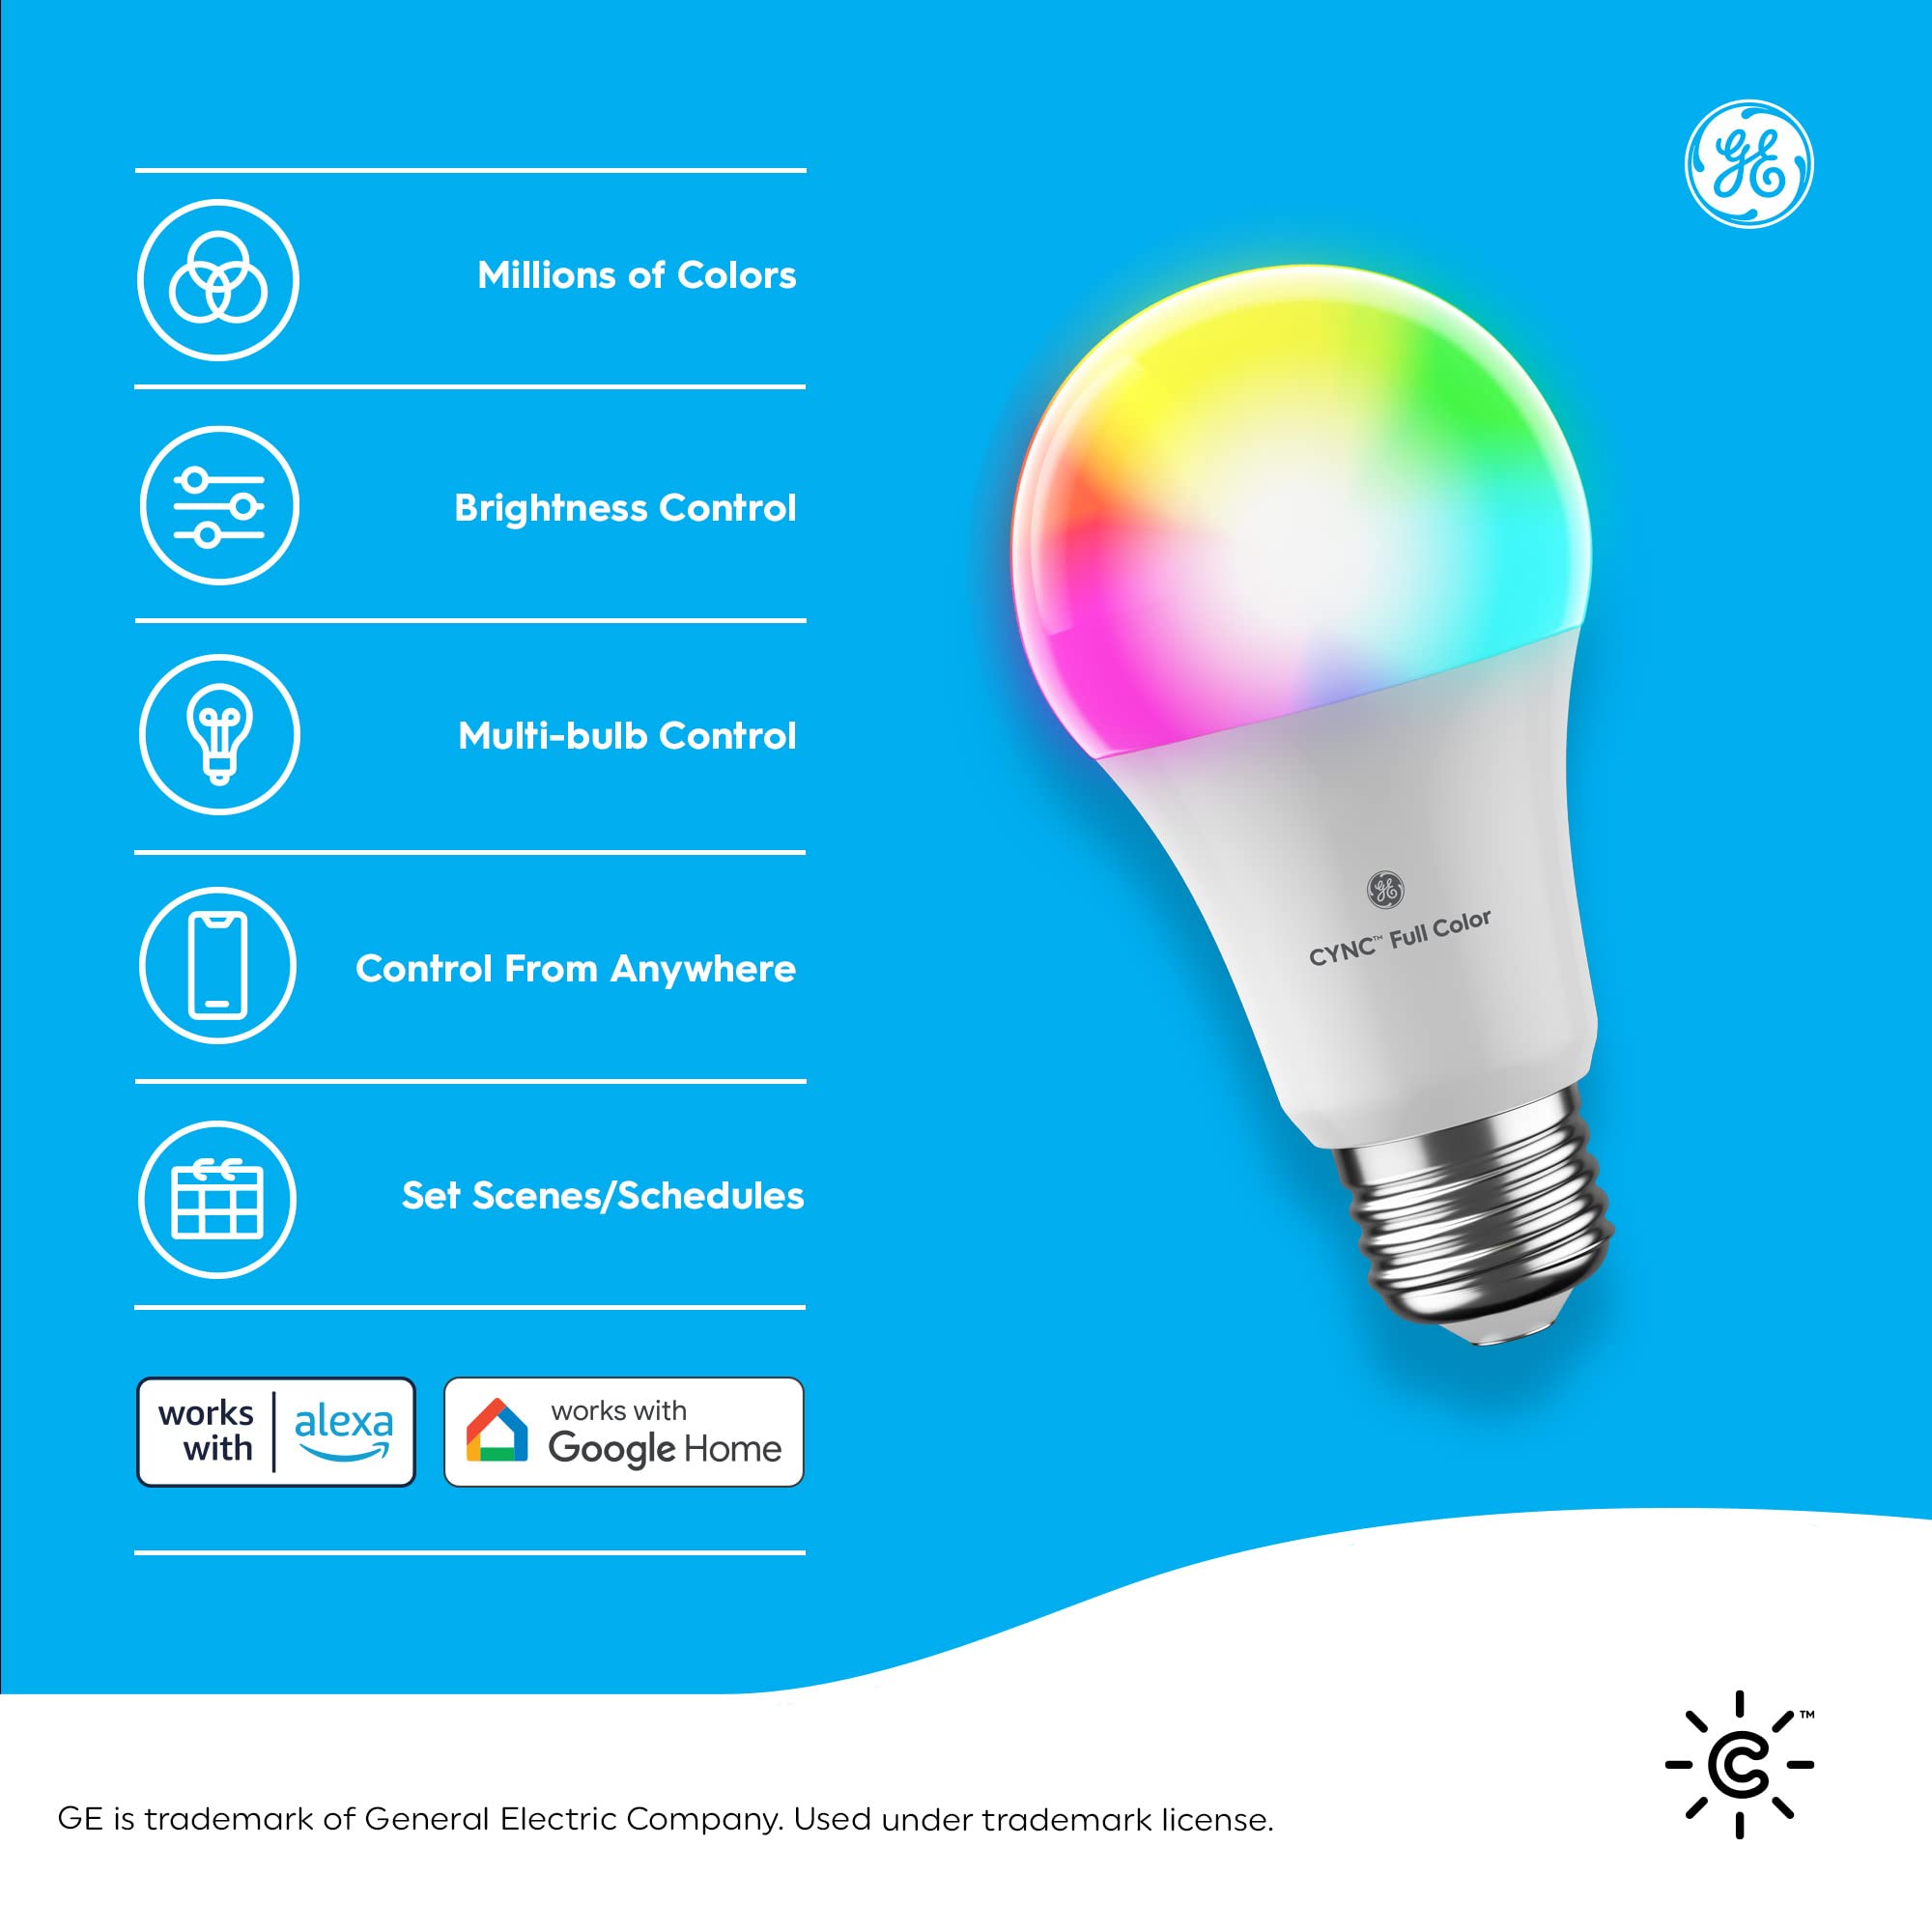 GE Lighting CYNC Smart LED Light Bulb, Color Changing Lights, Bluetooth and Wi-Fi Lights, Works with Alexa and Google Home, A19 Light Bulb (1 Pack)